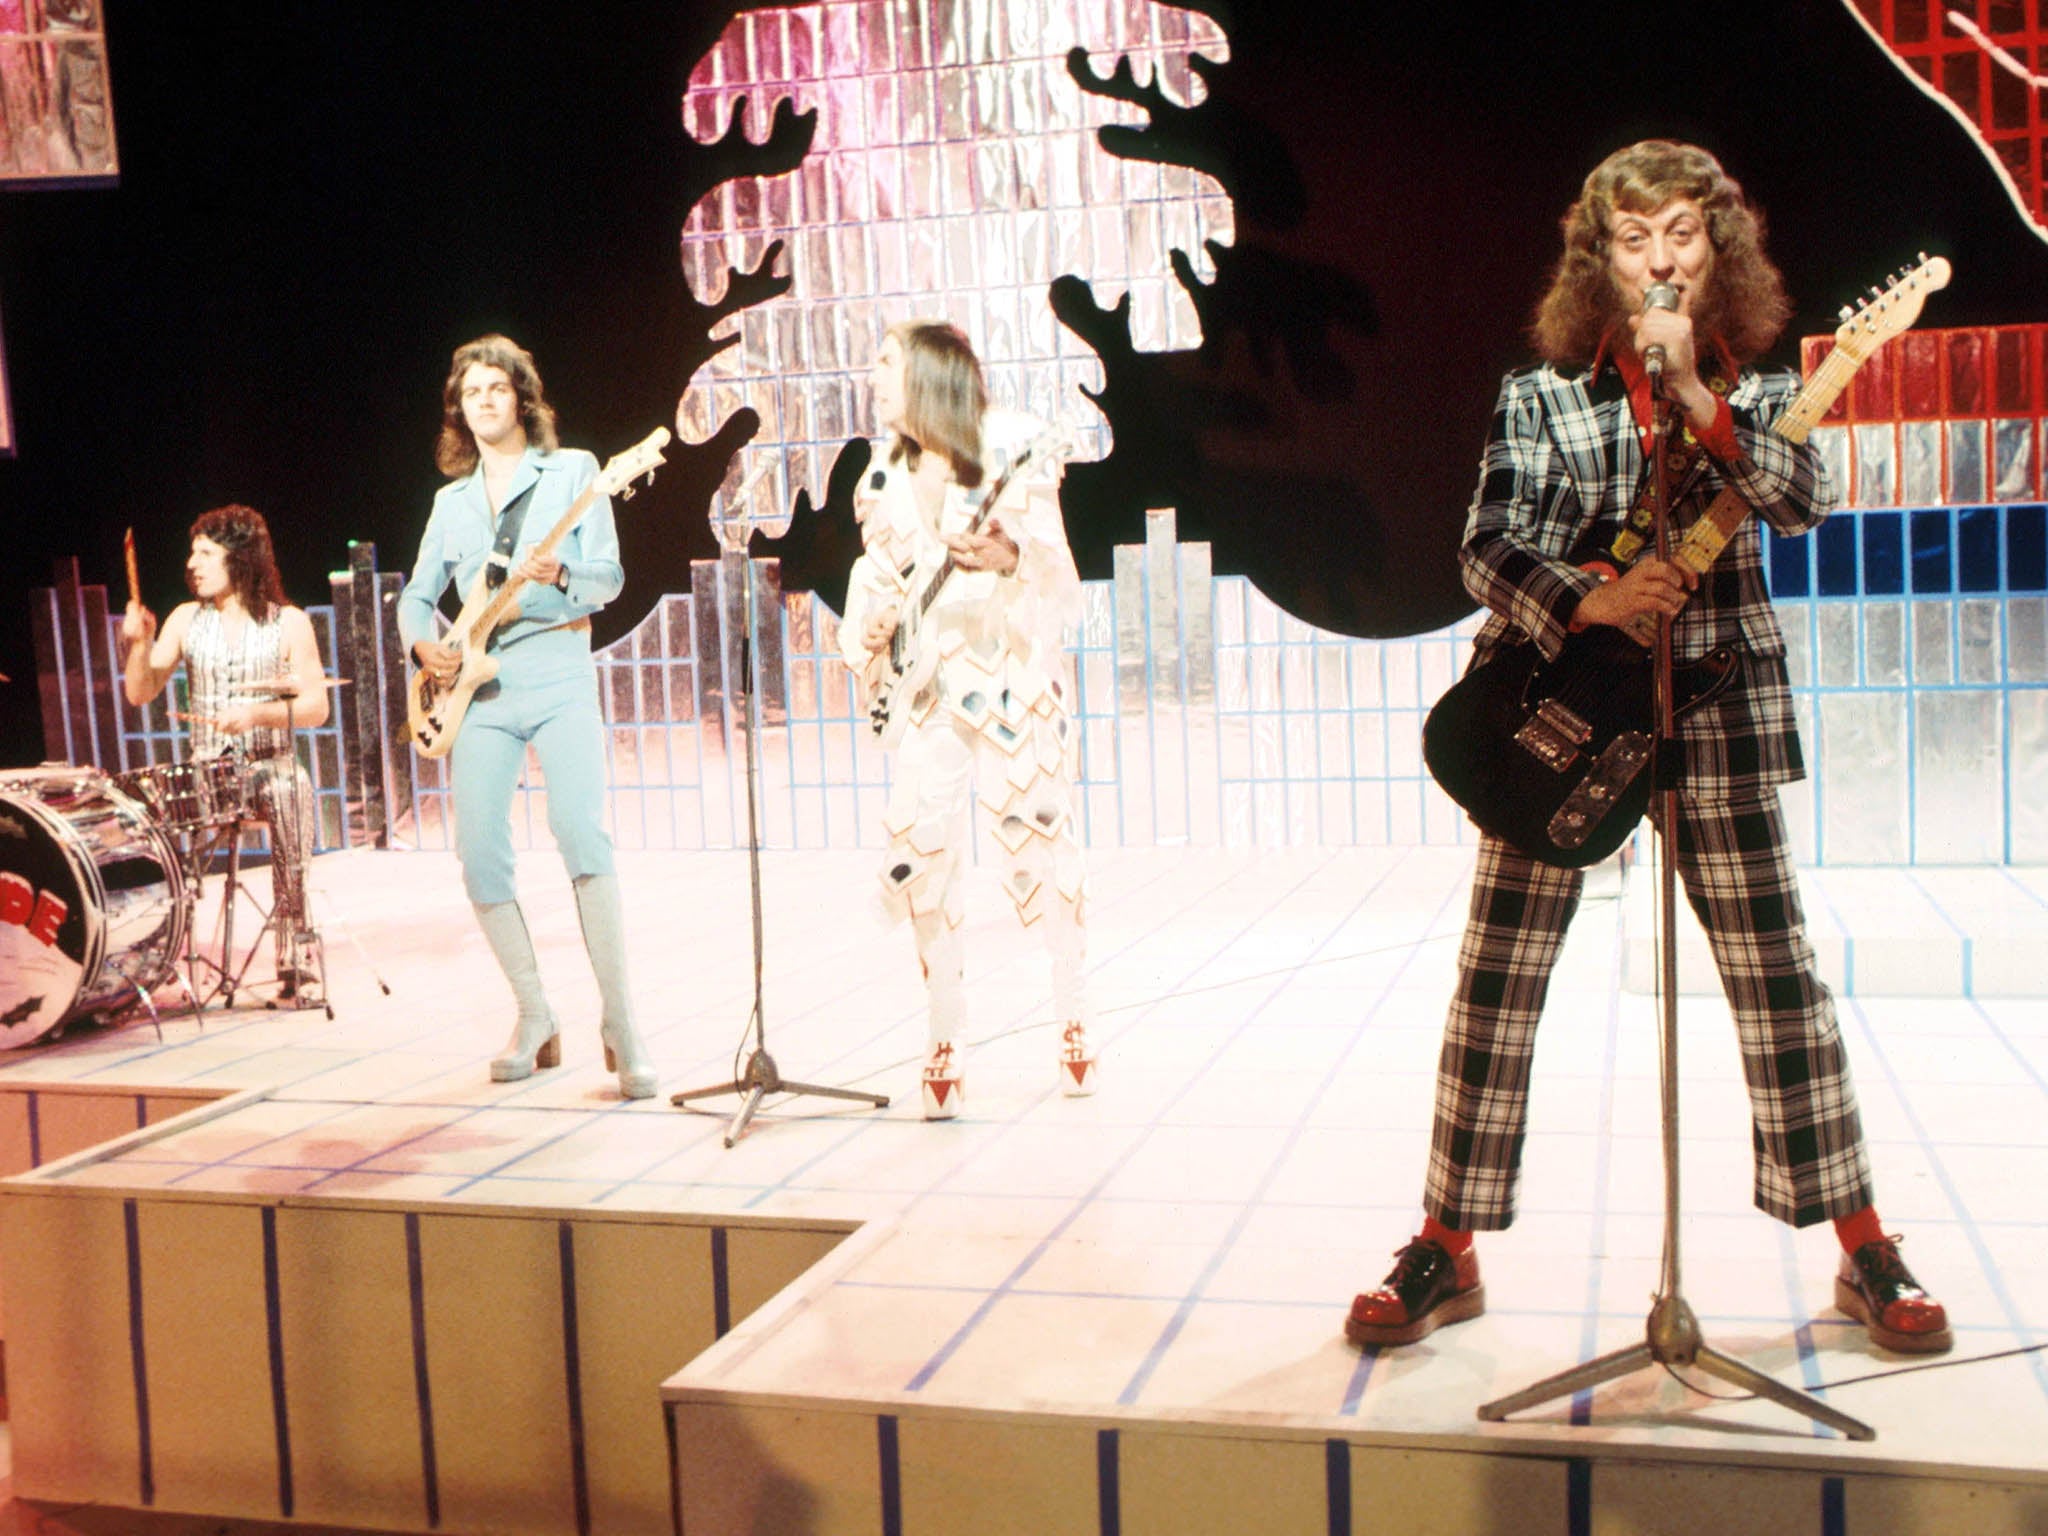 Two records by Slade (above) and Wizzard sold in staggering quantities, and suddenly the idea of a Christmas single being popular, cool and causing an exciting media storm in a traditionally slow news week was born